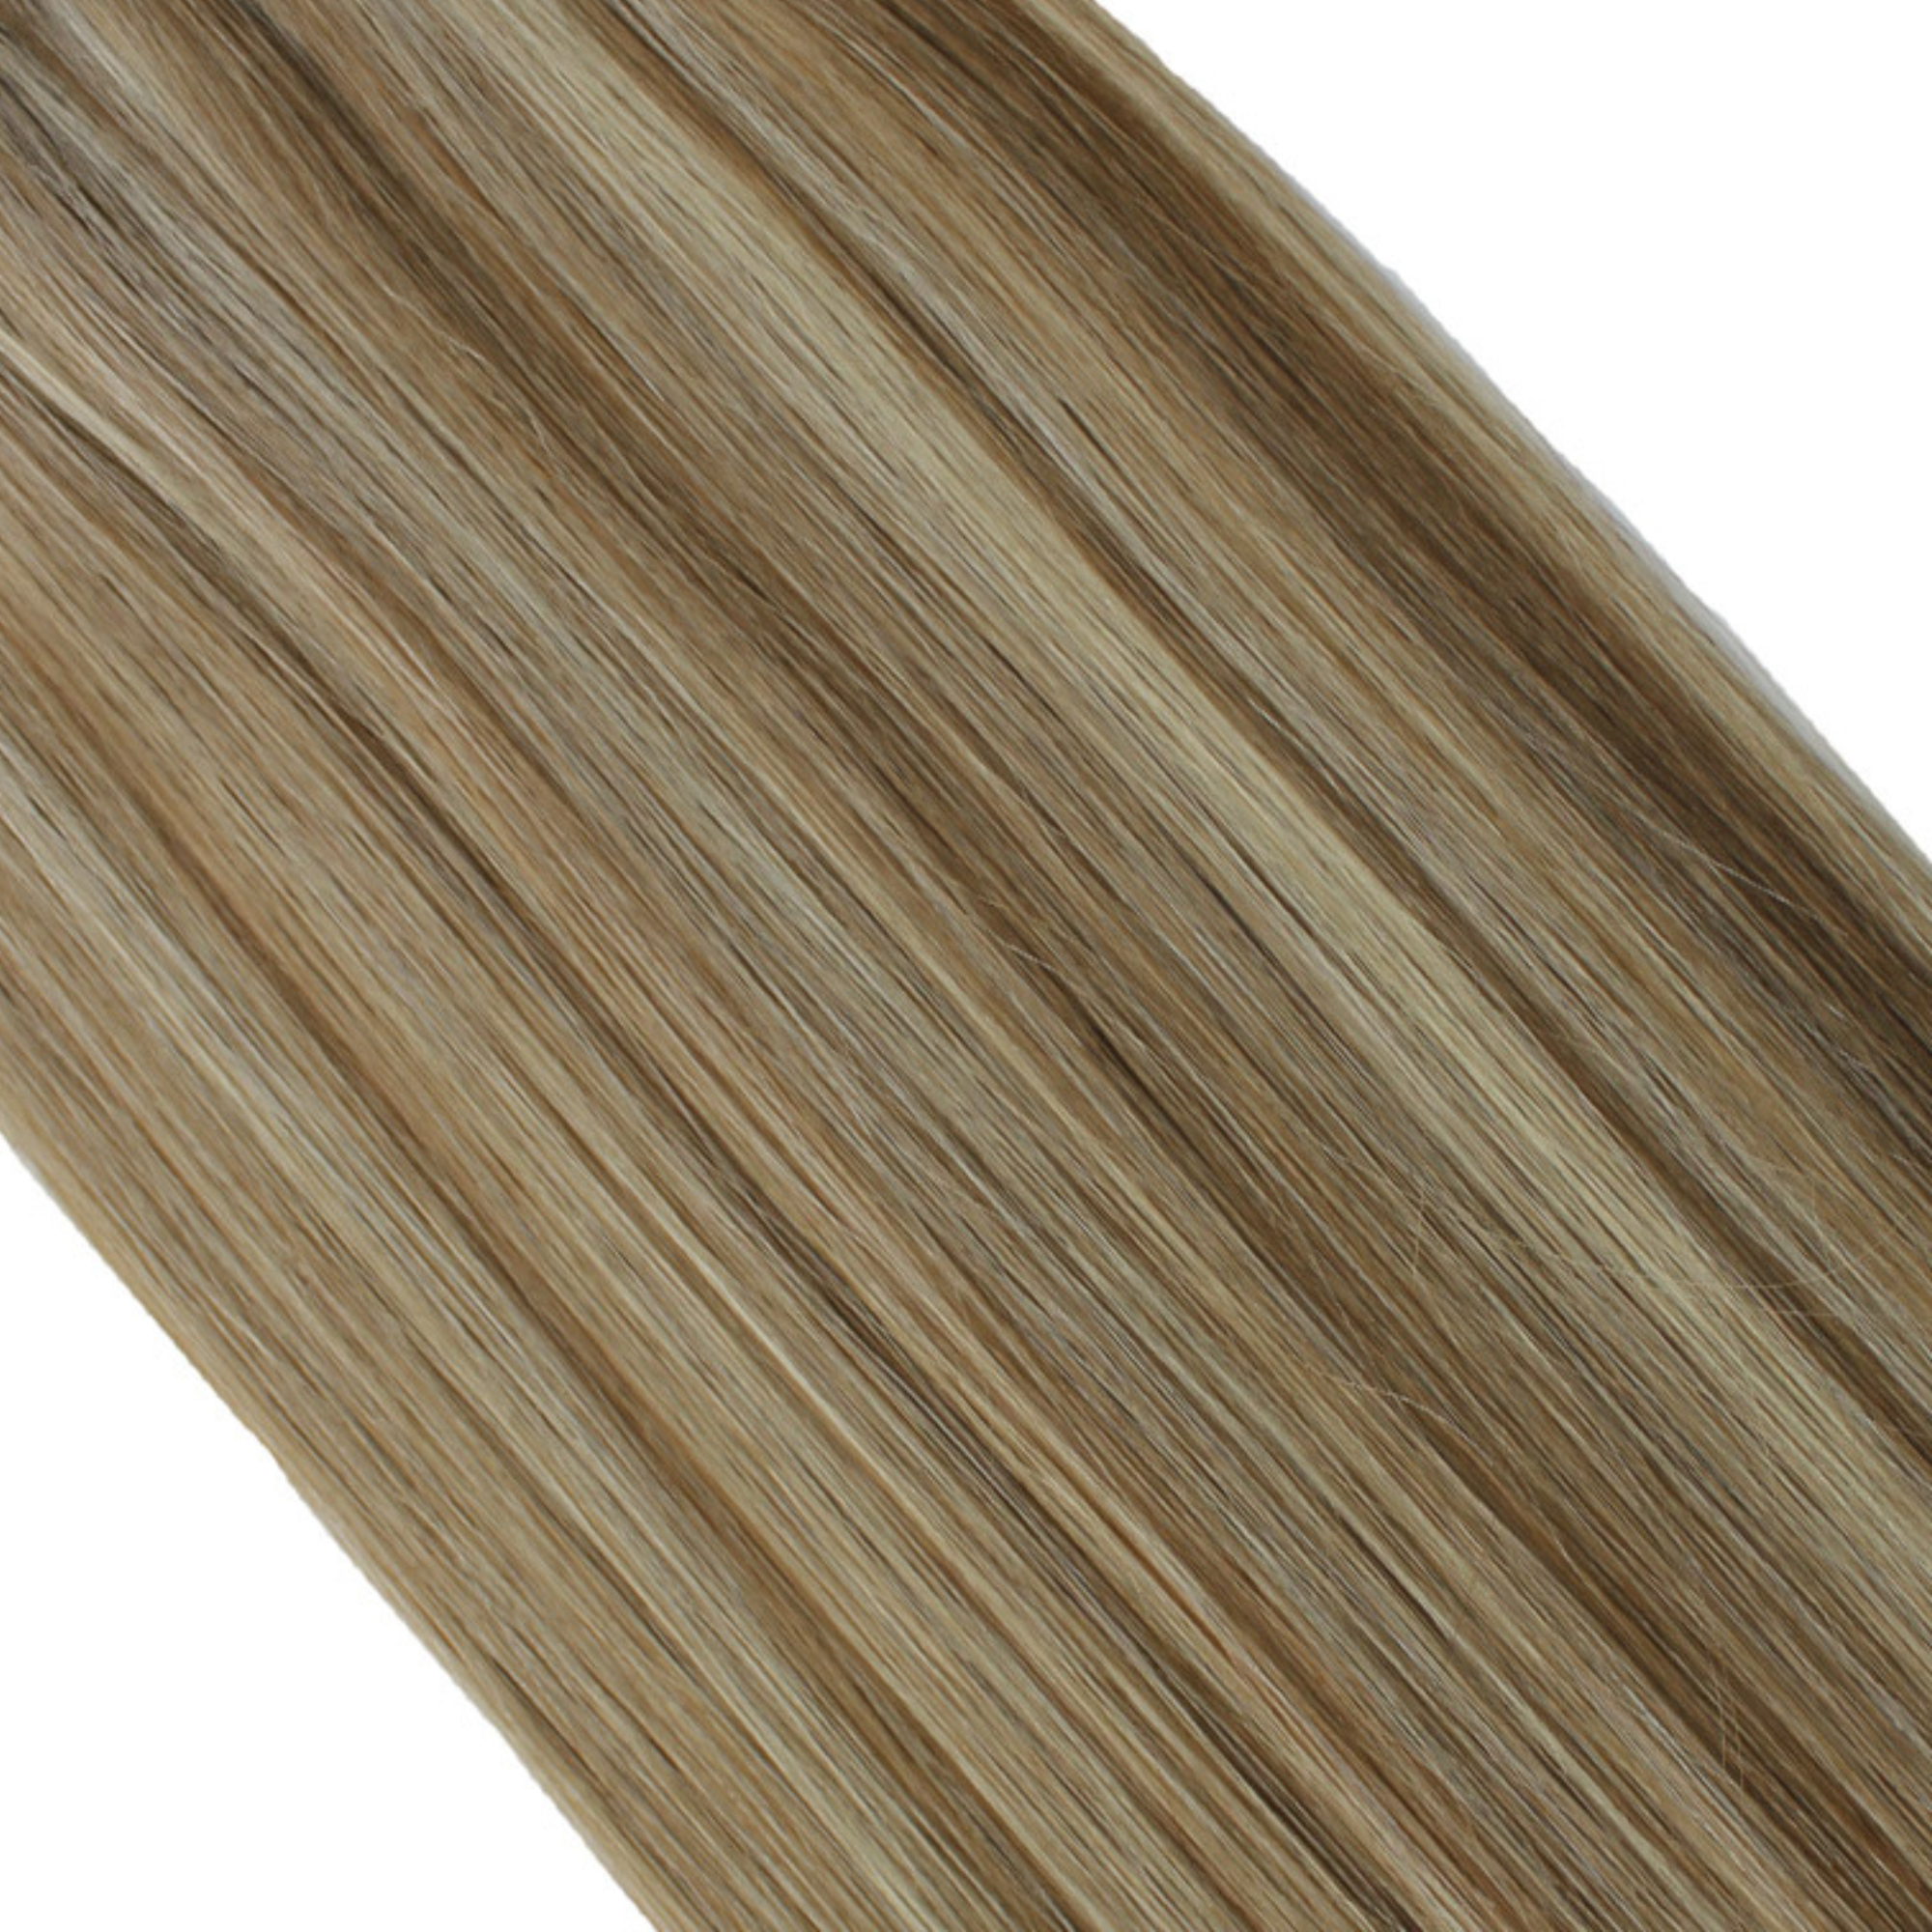 "hair rehab london 18" tape hair extensions shade swatch titled supermodel style"